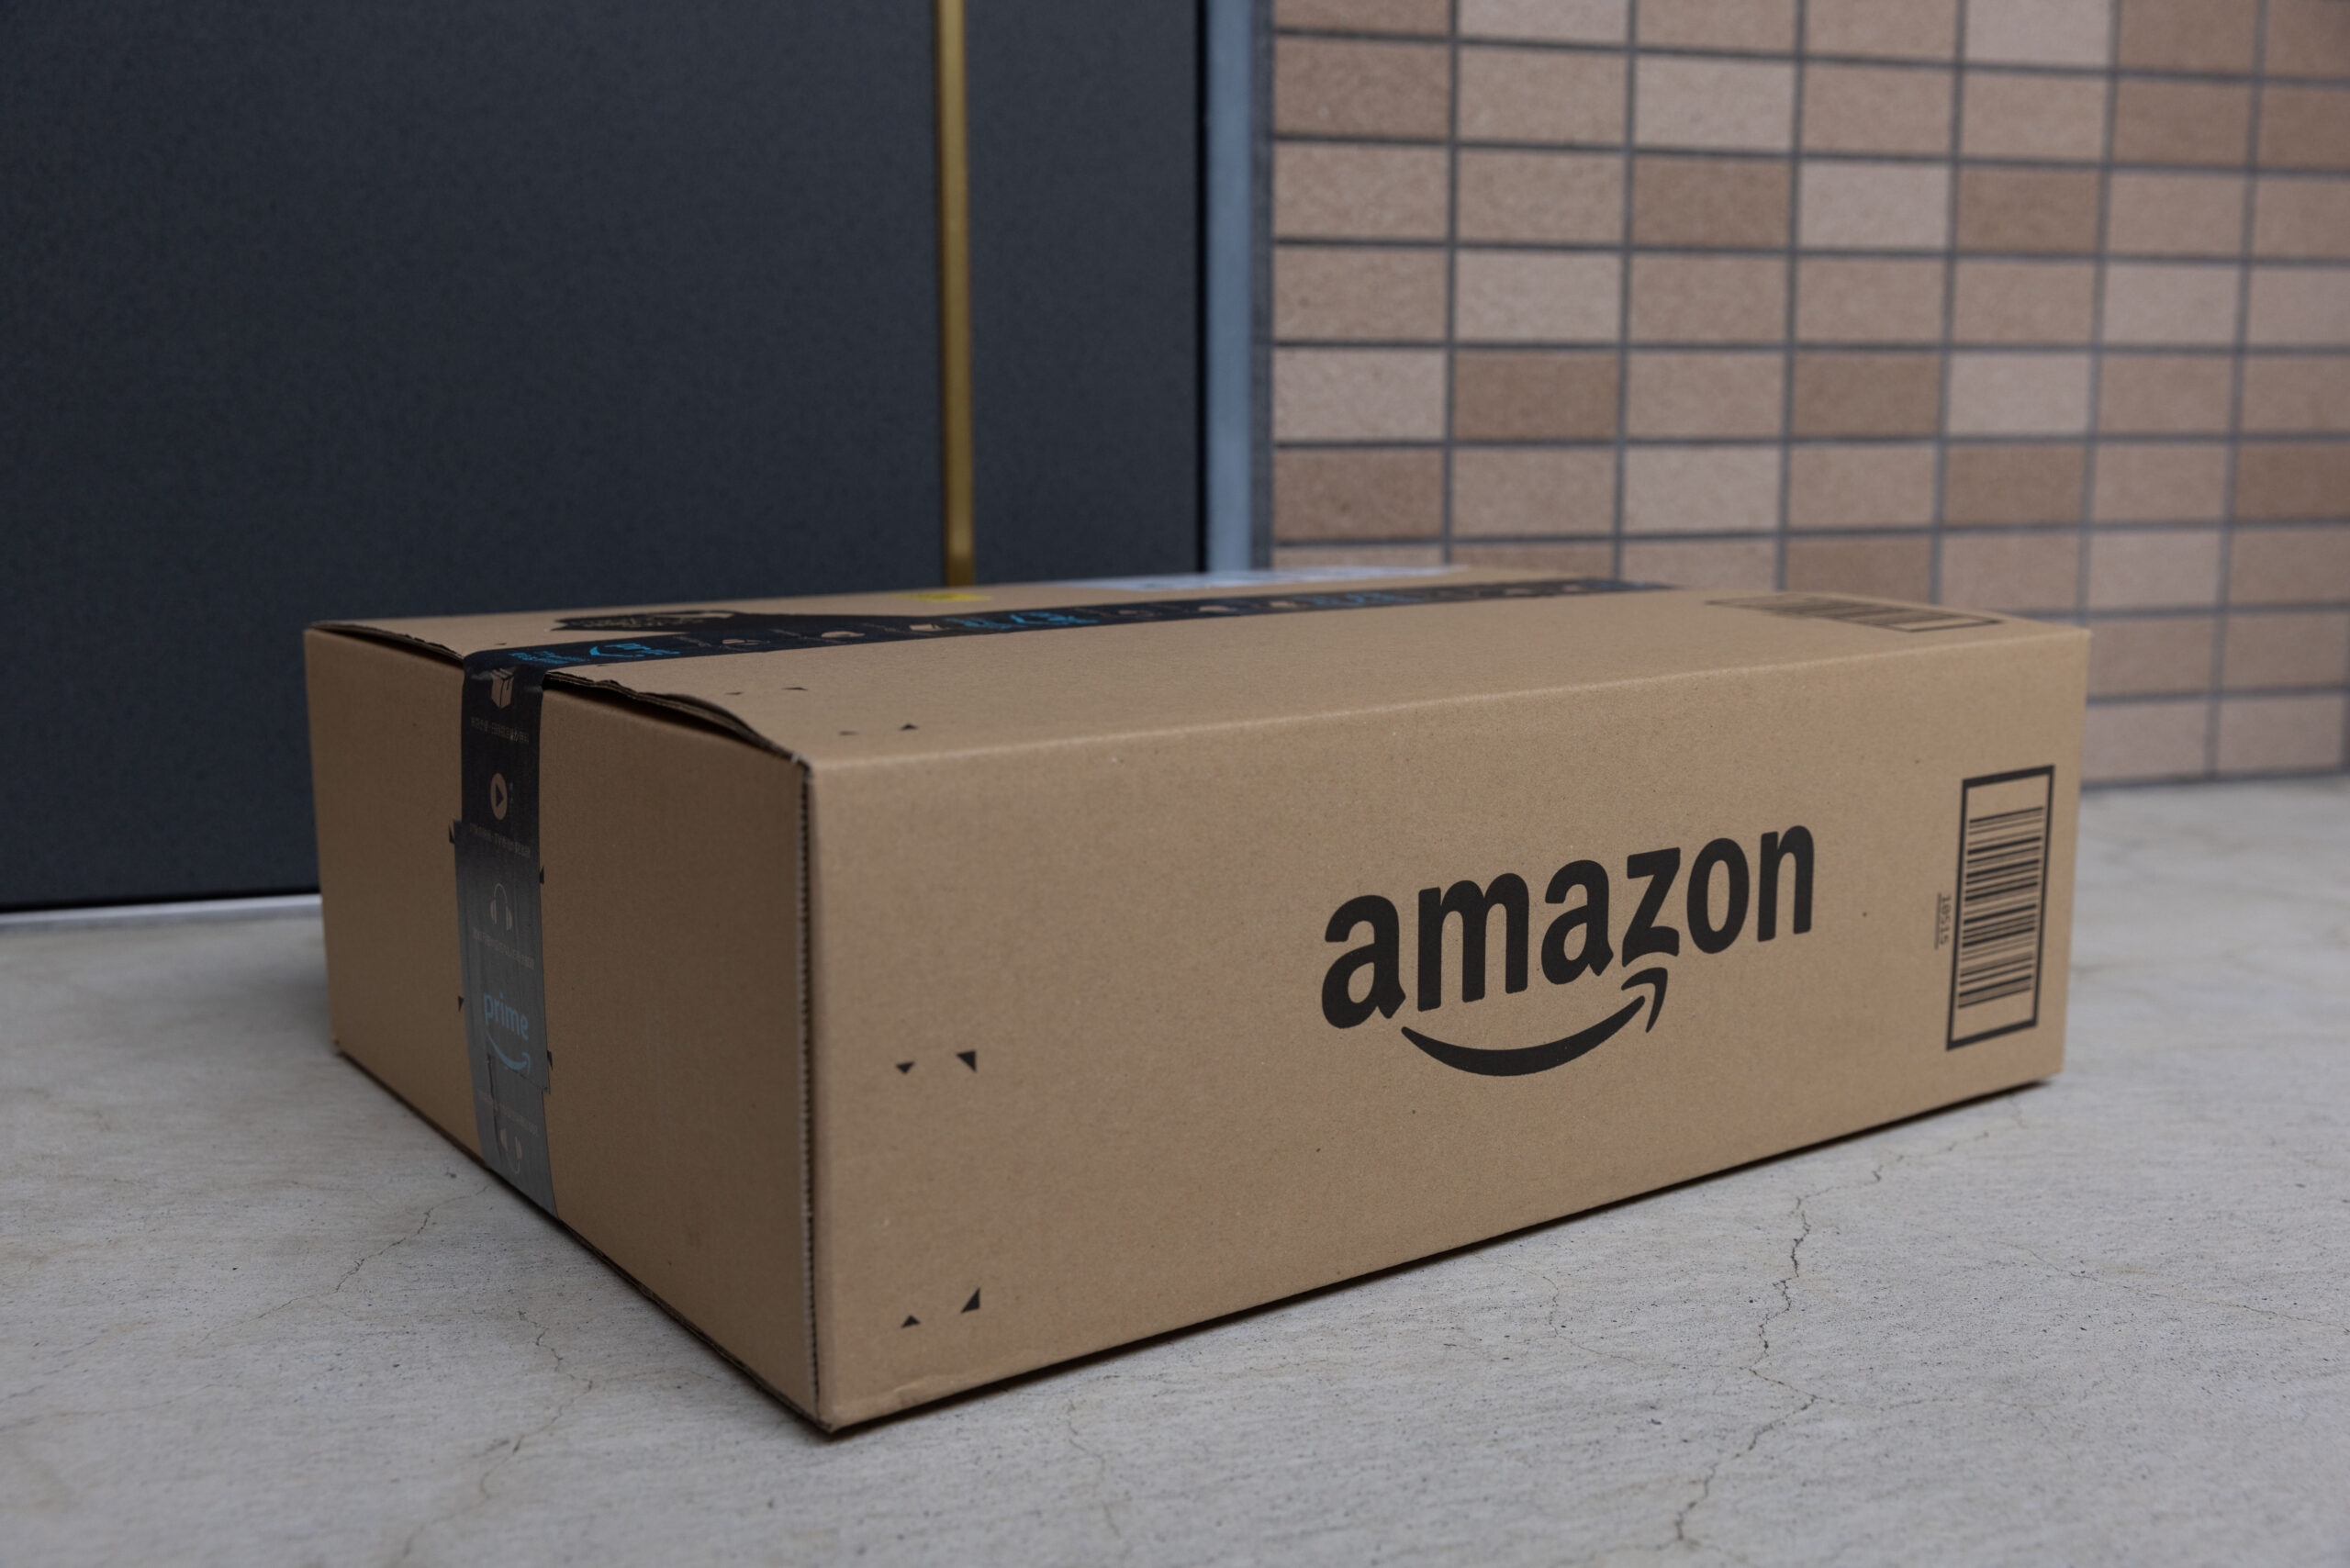 A box with the Amazon logo is on a gray doorstep. In the background, a blue door and a tiled wall.